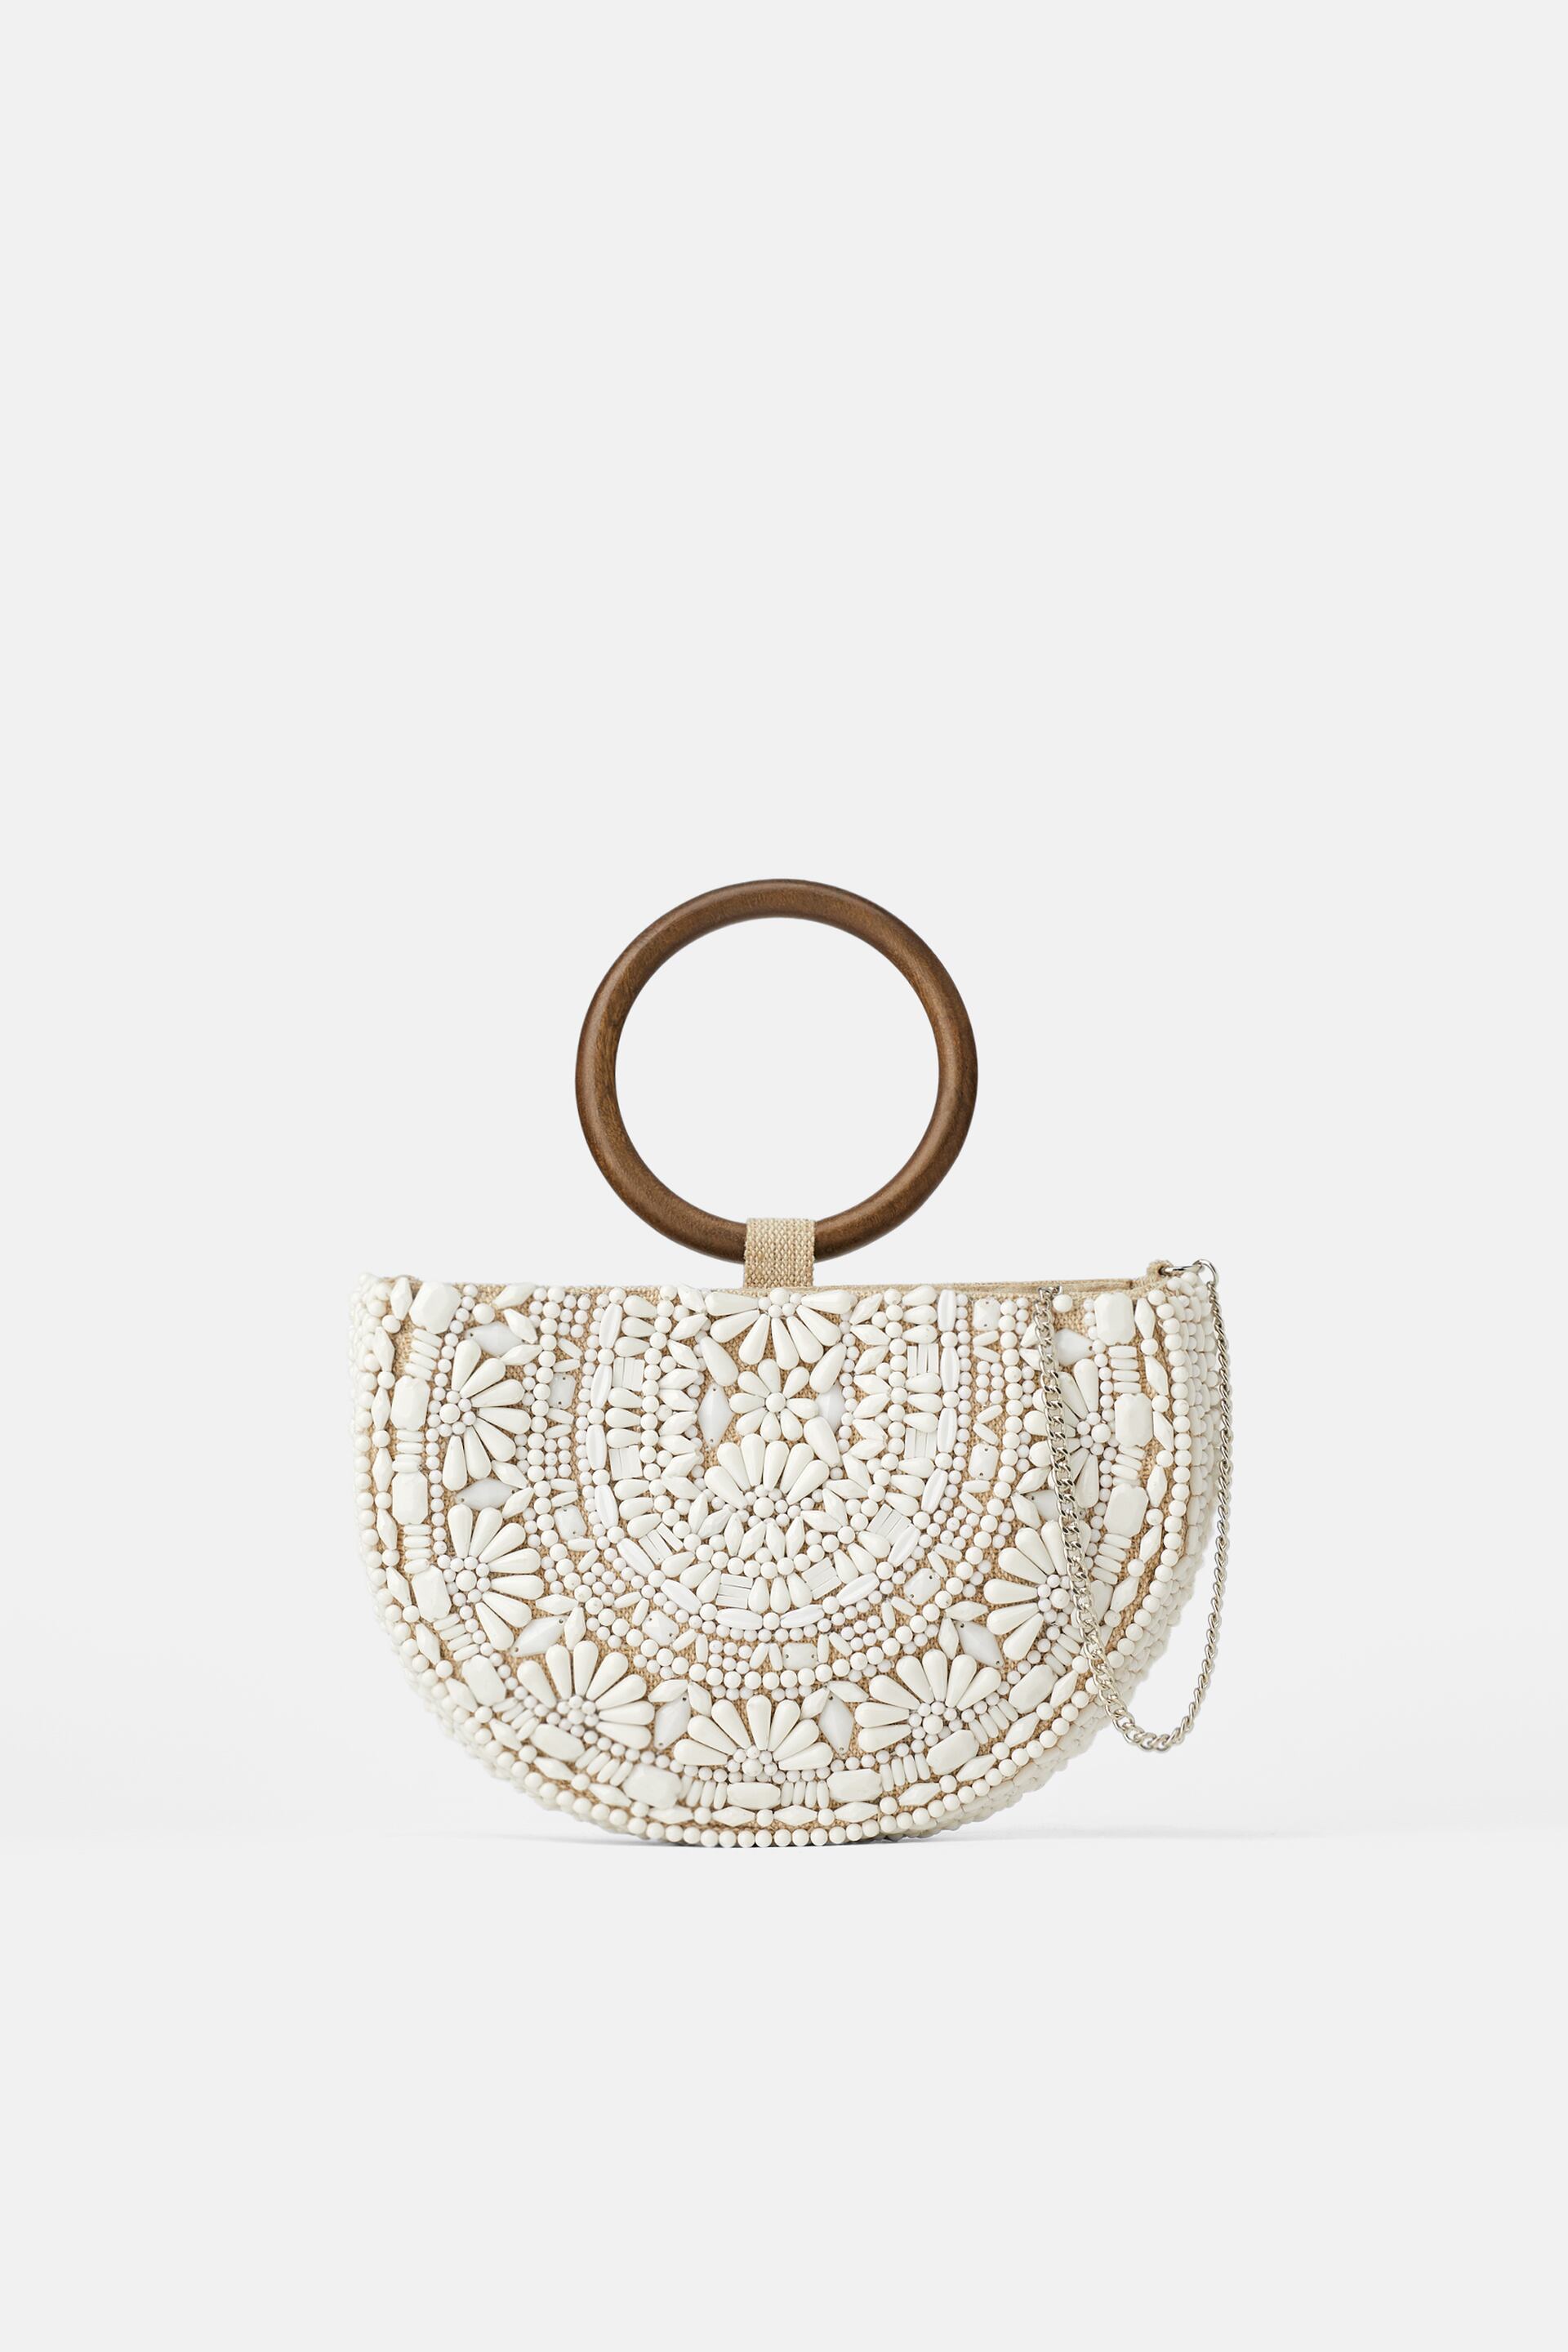 Image 2 of OVAL SHOULDER BAG IN NATURAL FIBER WITH BEADS by Zara